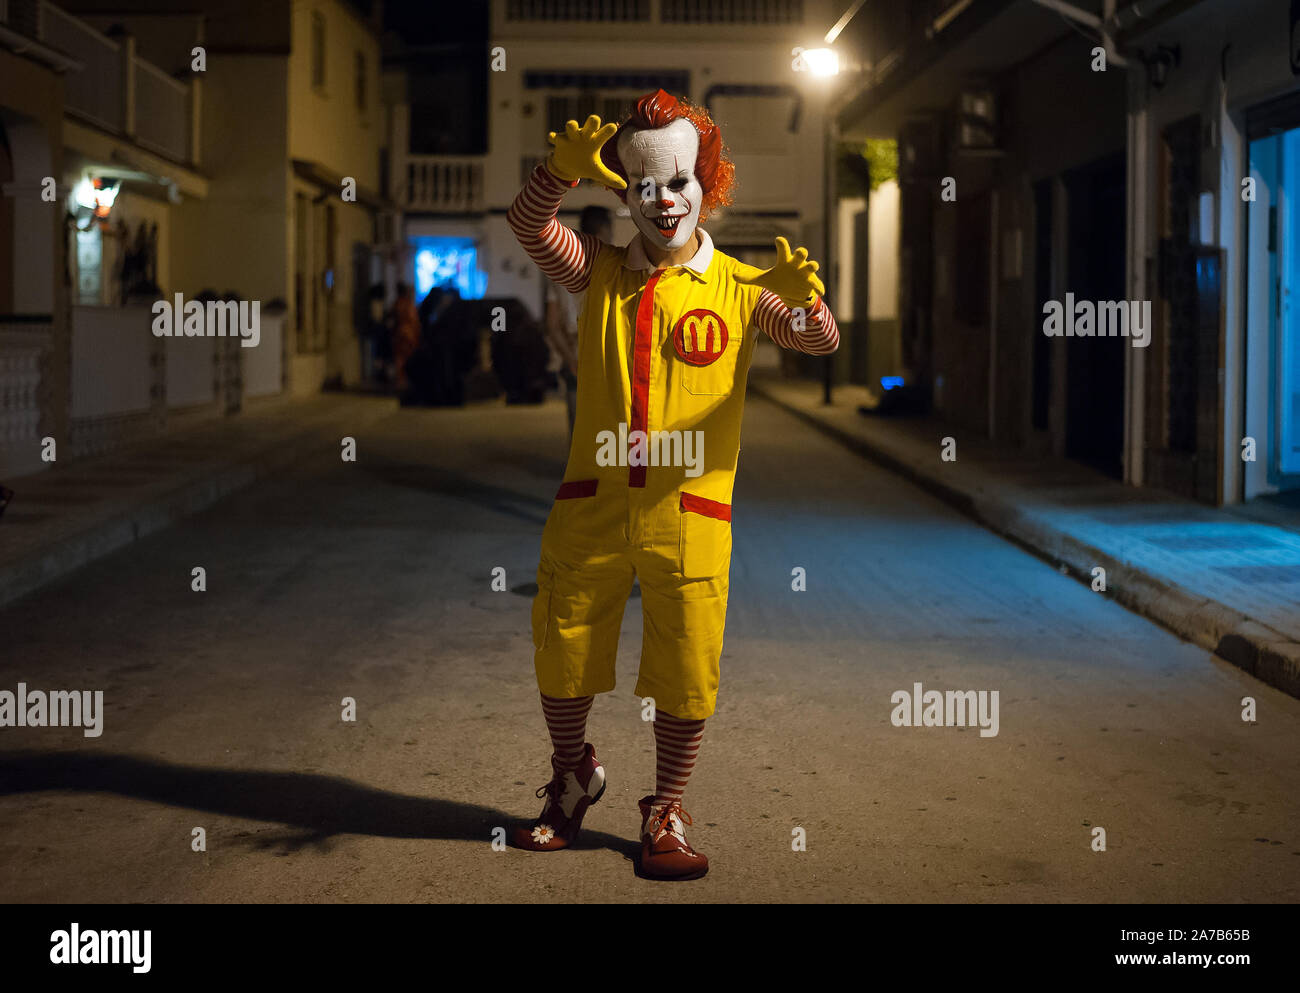 Malaga, Spain. 31st Oct, 2019. A man dressed up as a diabolical Ronald McDonalds takes part during the VI edition of ''Churriana Noche del Terror'' (Churriana Horror Night) to celebrate the Halloween night in the neighbourhood of Churriana.Residents of Churriana participate in the Halloween day dressed with horrific costumes, decorating their houses and with scary performances along the streets. The 'Churriana Horror Night' is one the most popular event in the city to marks the Halloween Day, and for this occasion the theme of the edition is the witches. (Credit Image: © Jesus Merida/SOPA I Stock Photo